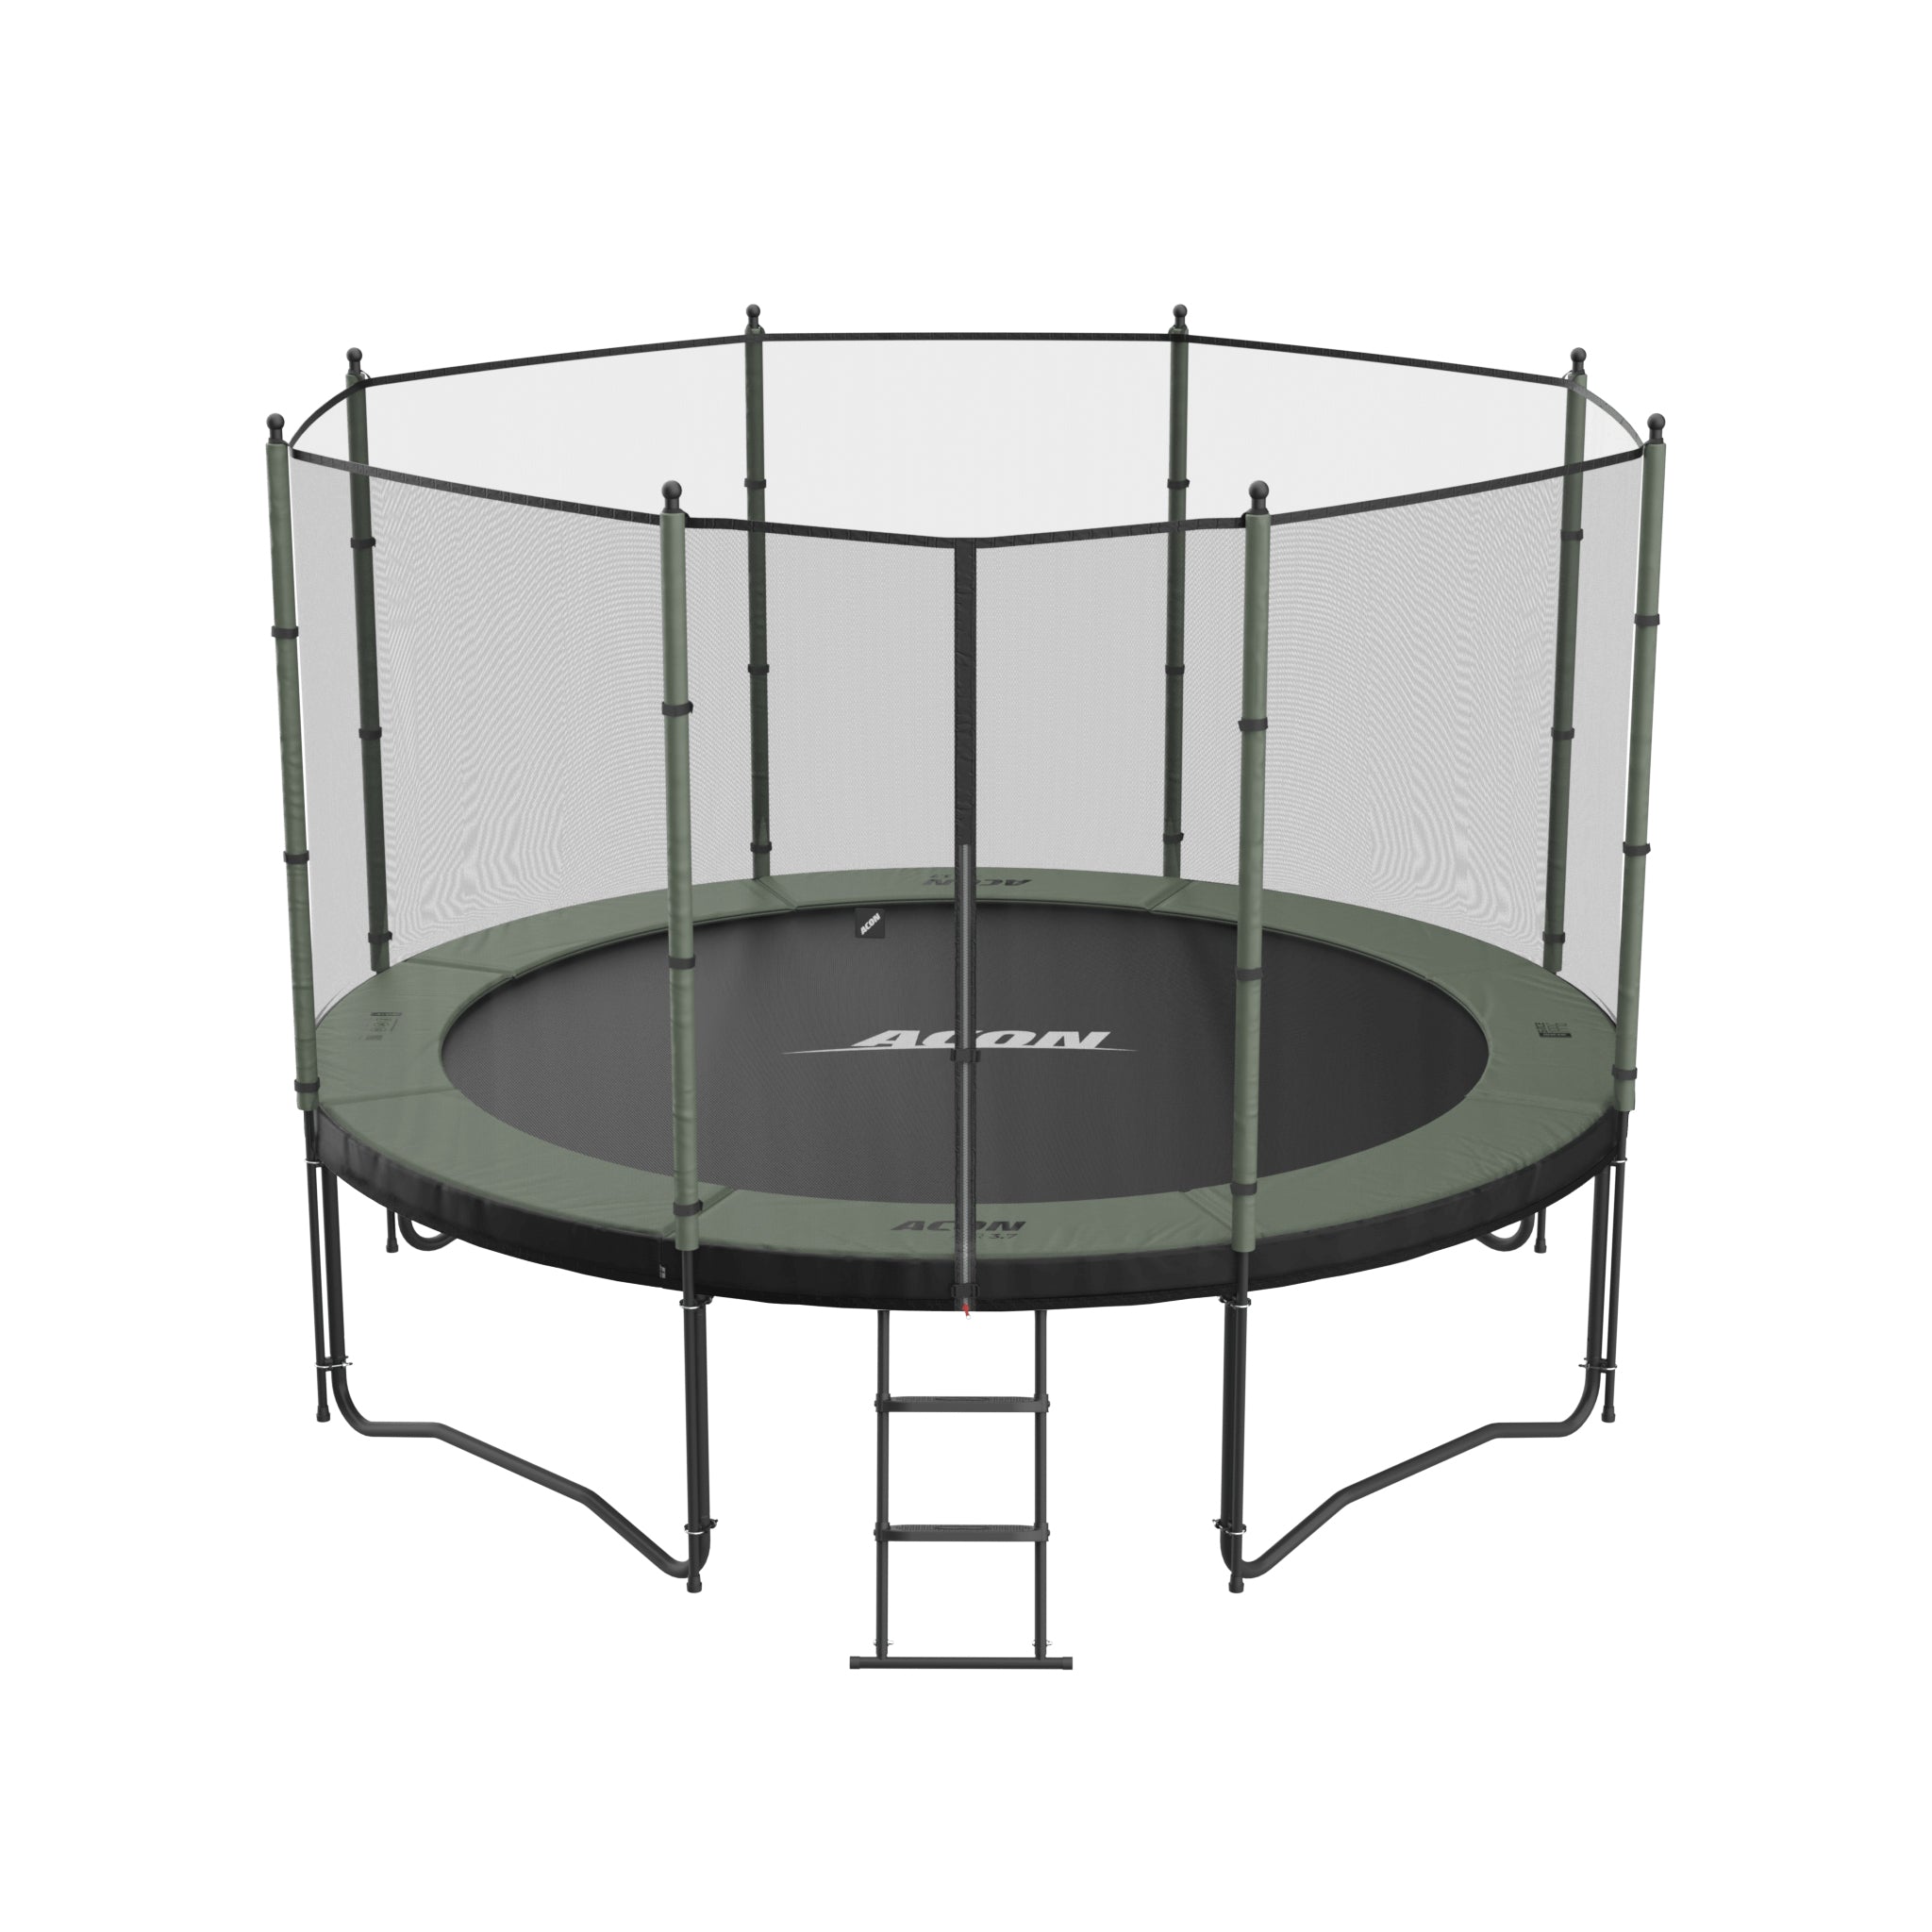 Air 3,7m Trampoline Package with Enclosure Buy now! – Acon EU